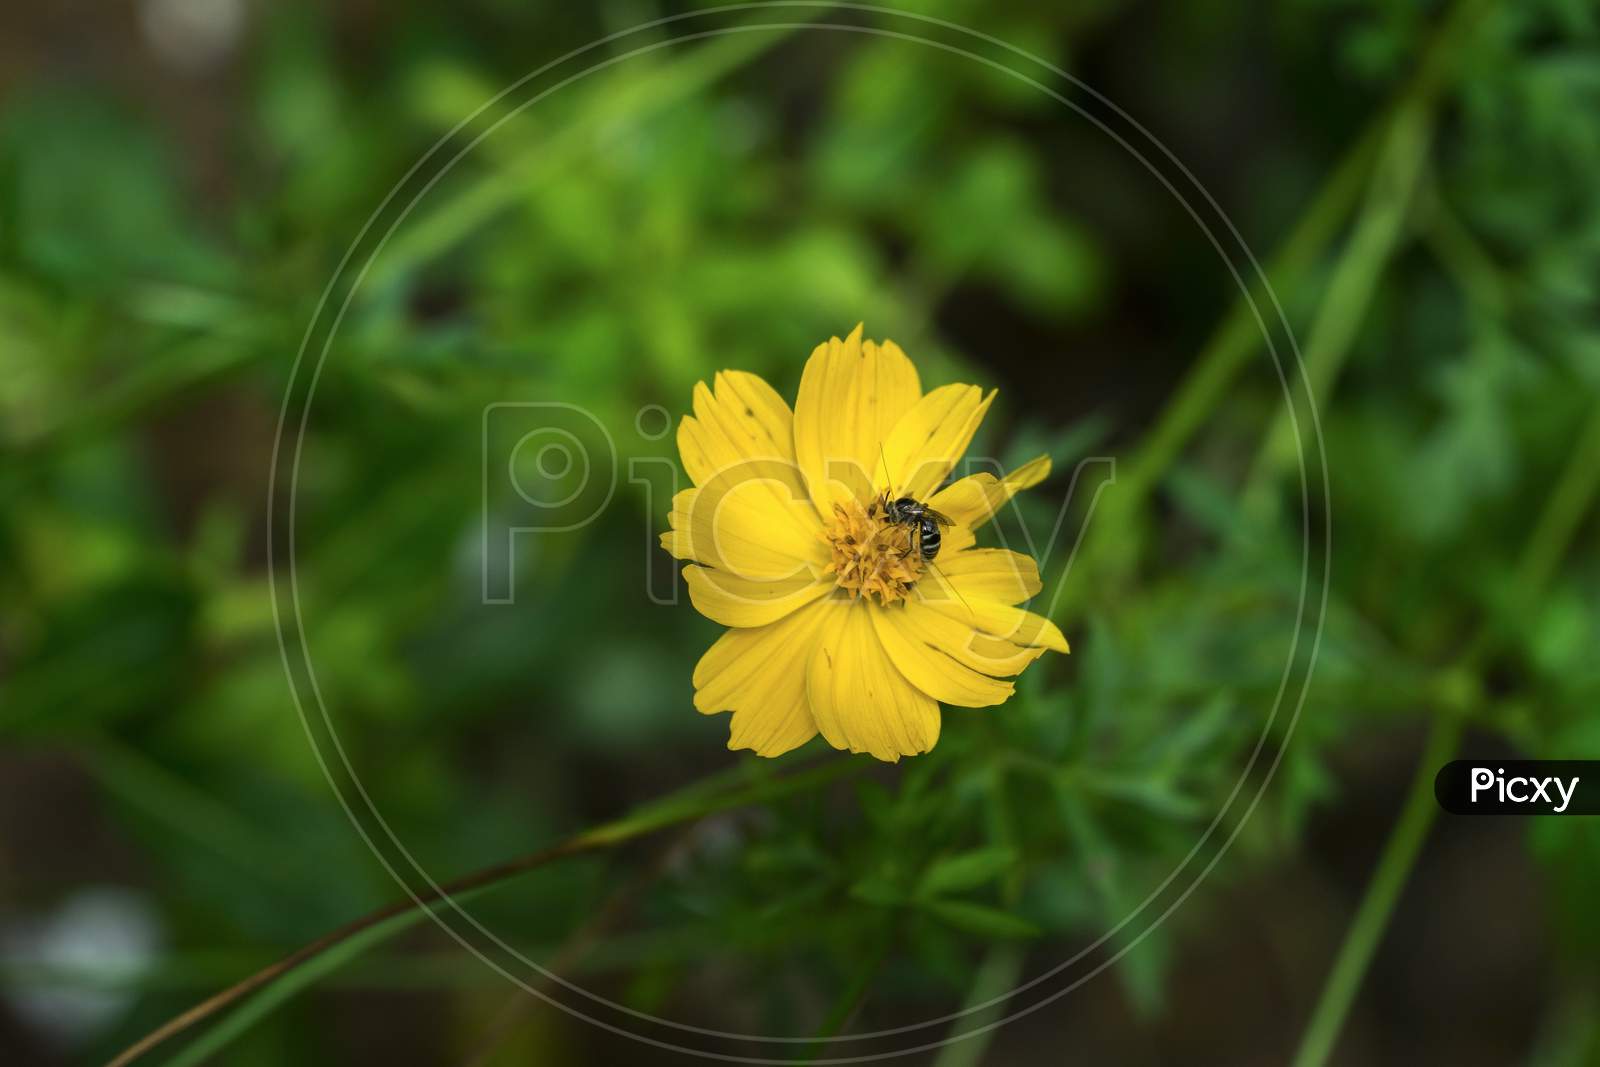 Bee Is Feeding Nectar From Yellow Cosmos Flower.Cosmos Sulphureus Is Also Known As Sulfur Cosmos.